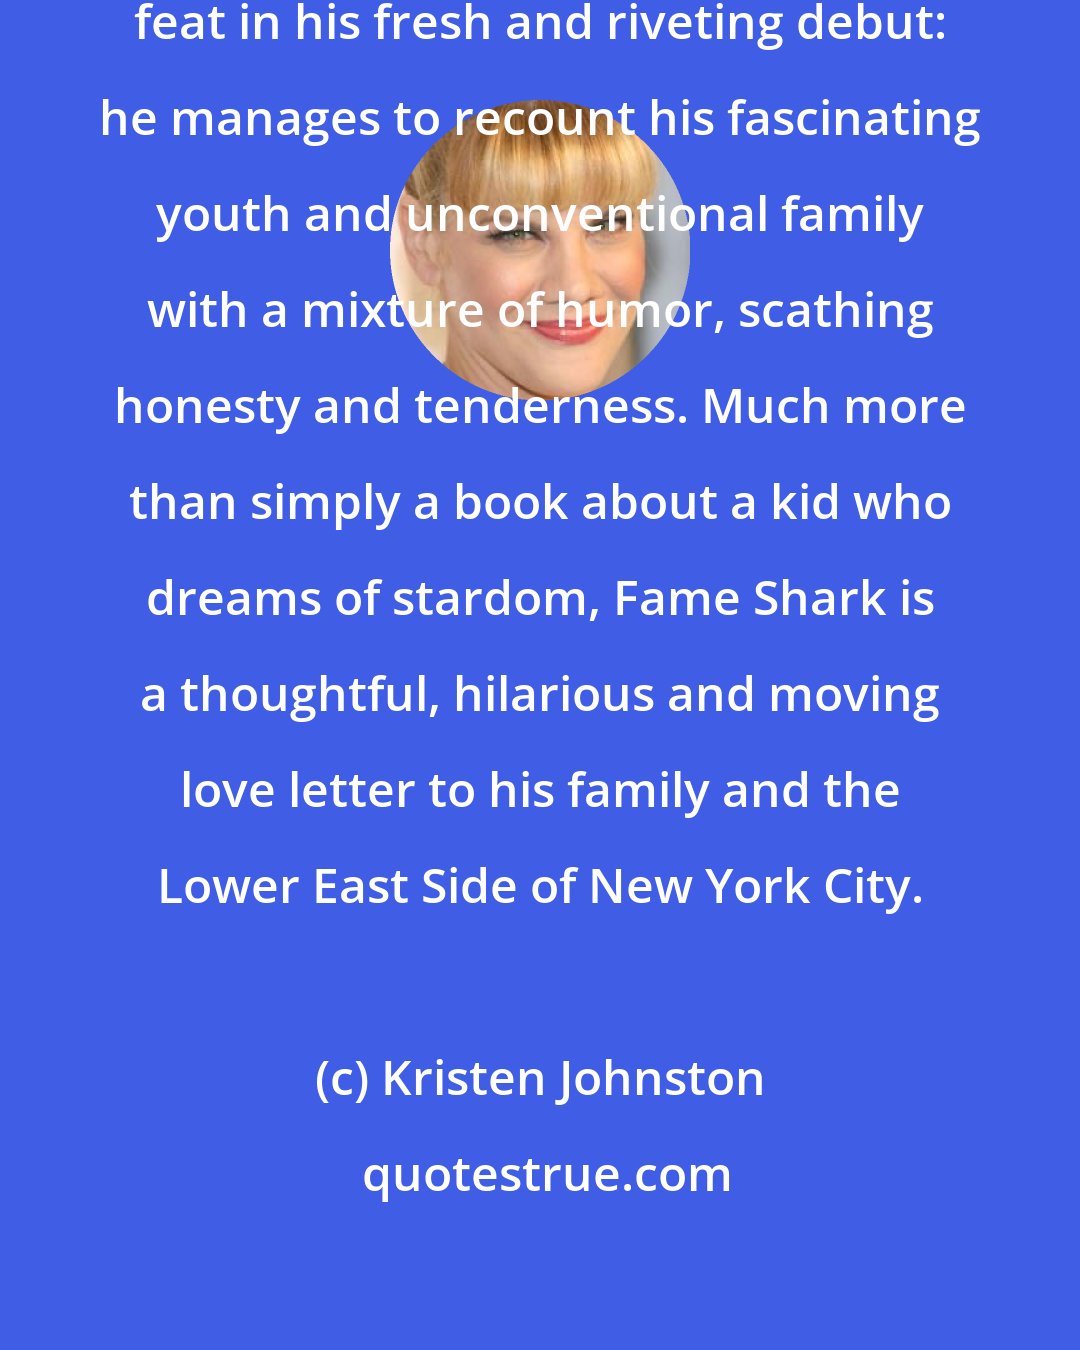 Kristen Johnston: Royal Young has accomplished a rare feat in his fresh and riveting debut: he manages to recount his fascinating youth and unconventional family with a mixture of humor, scathing honesty and tenderness. Much more than simply a book about a kid who dreams of stardom, Fame Shark is a thoughtful, hilarious and moving love letter to his family and the Lower East Side of New York City.